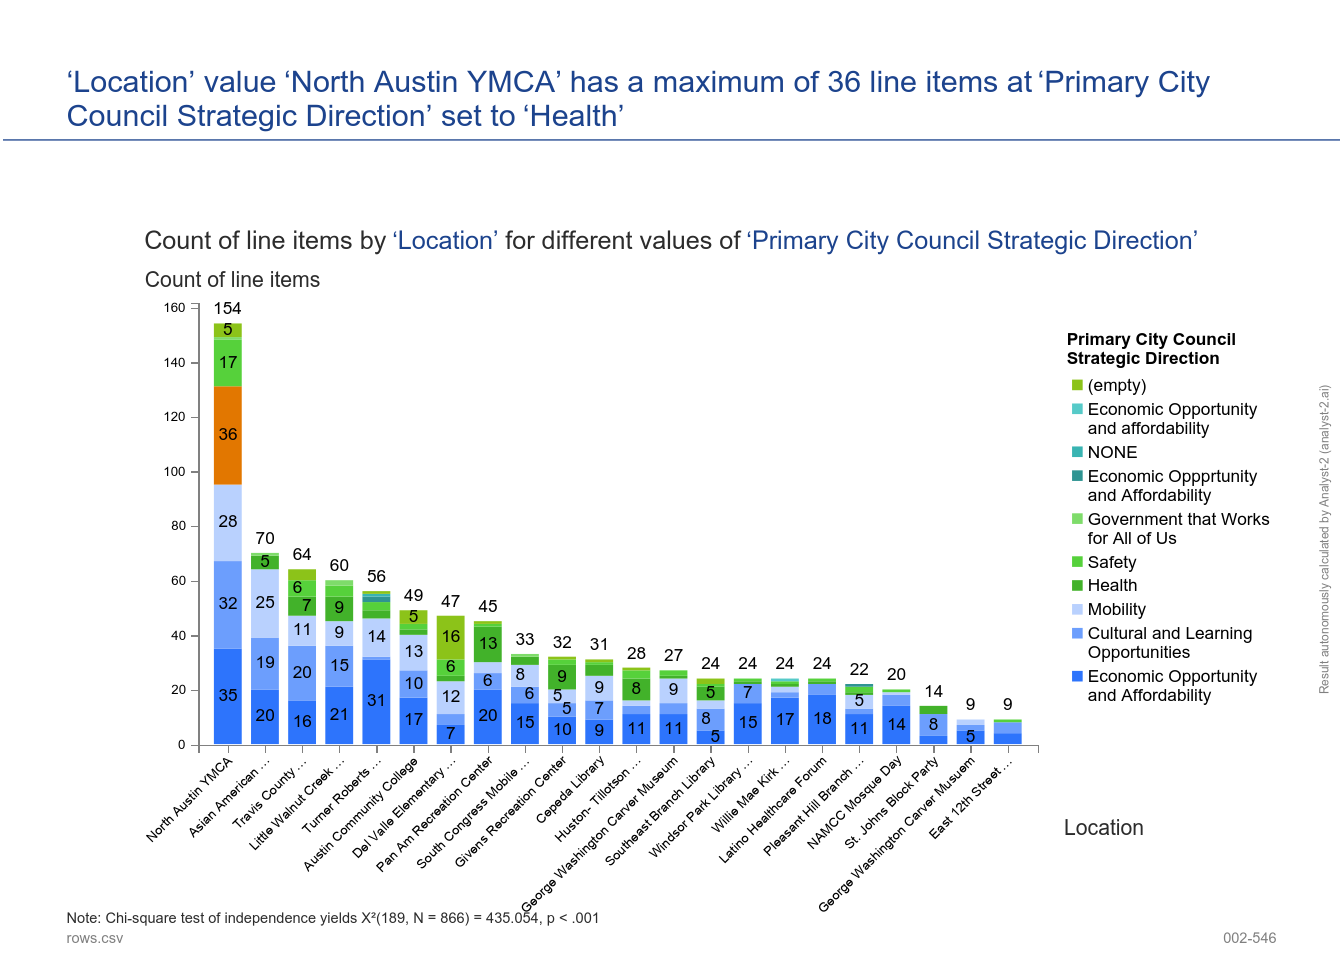 ‘Location’ value ‘North Austin YMCA’ has a maximum of 36 line items at ‘Primary City Council Strategic Direction’ set to ‘Health’. (Spirit Of East Austin Feedback Data - 002-546)